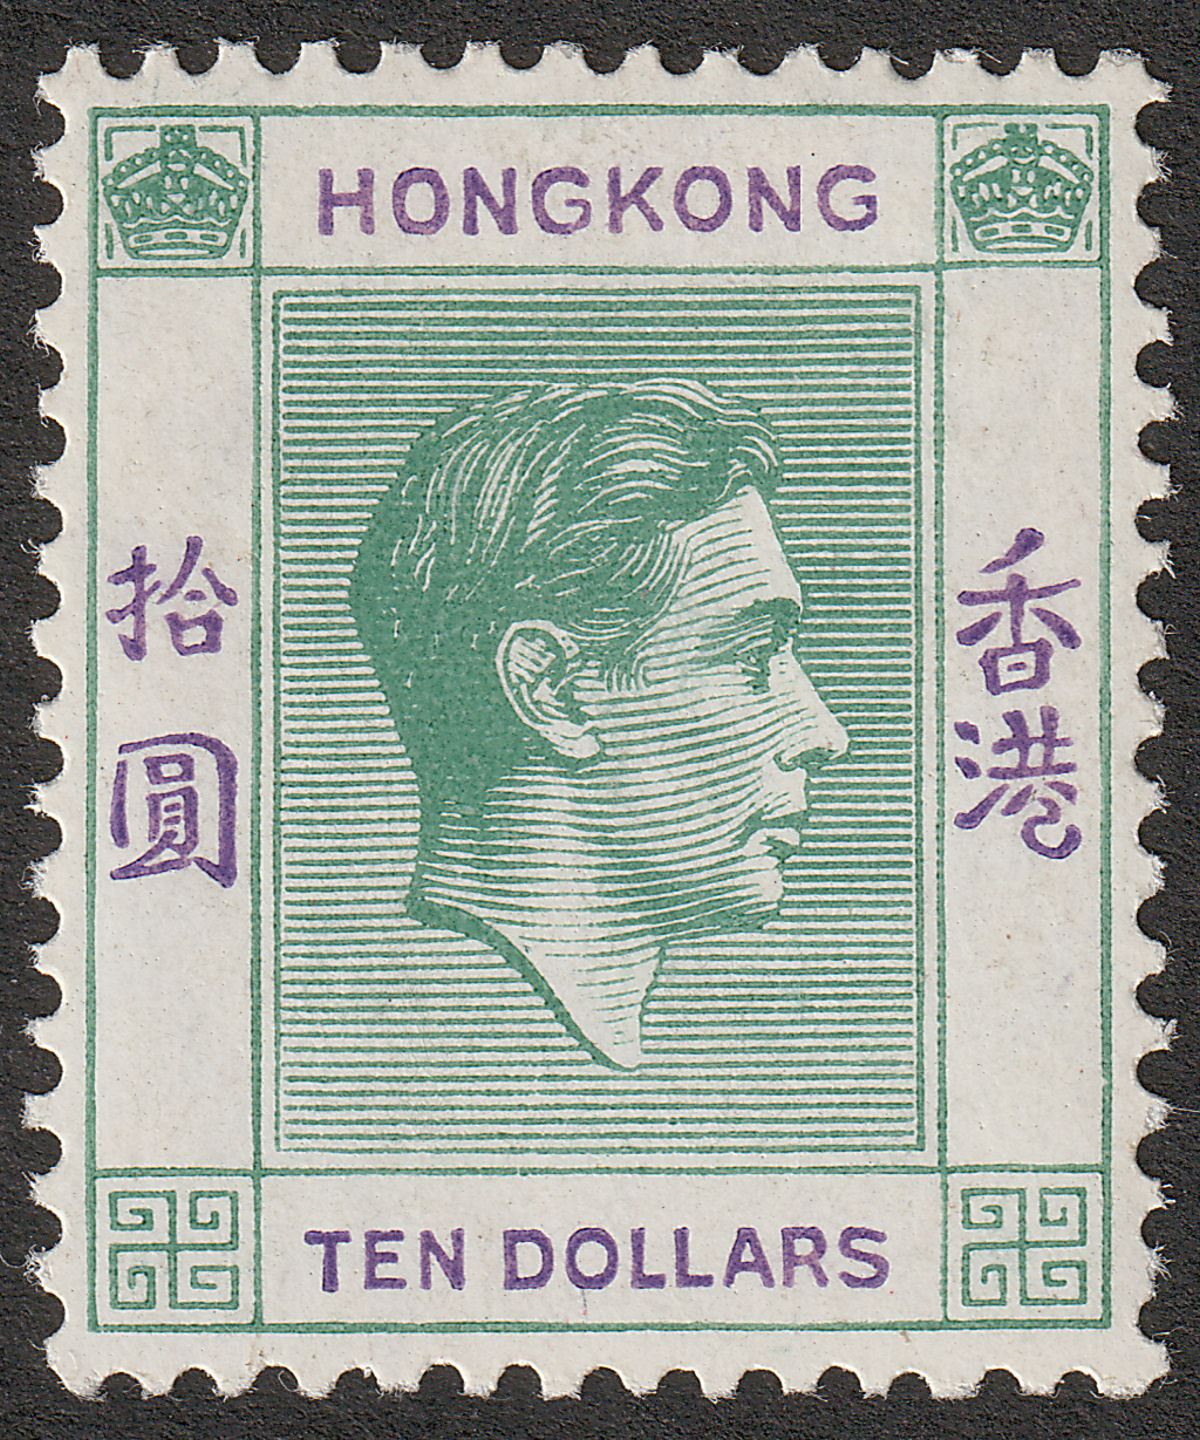 Hong Kong 1938 KGVI $10 Green and Violet Mint SG161 cat £700 very fine